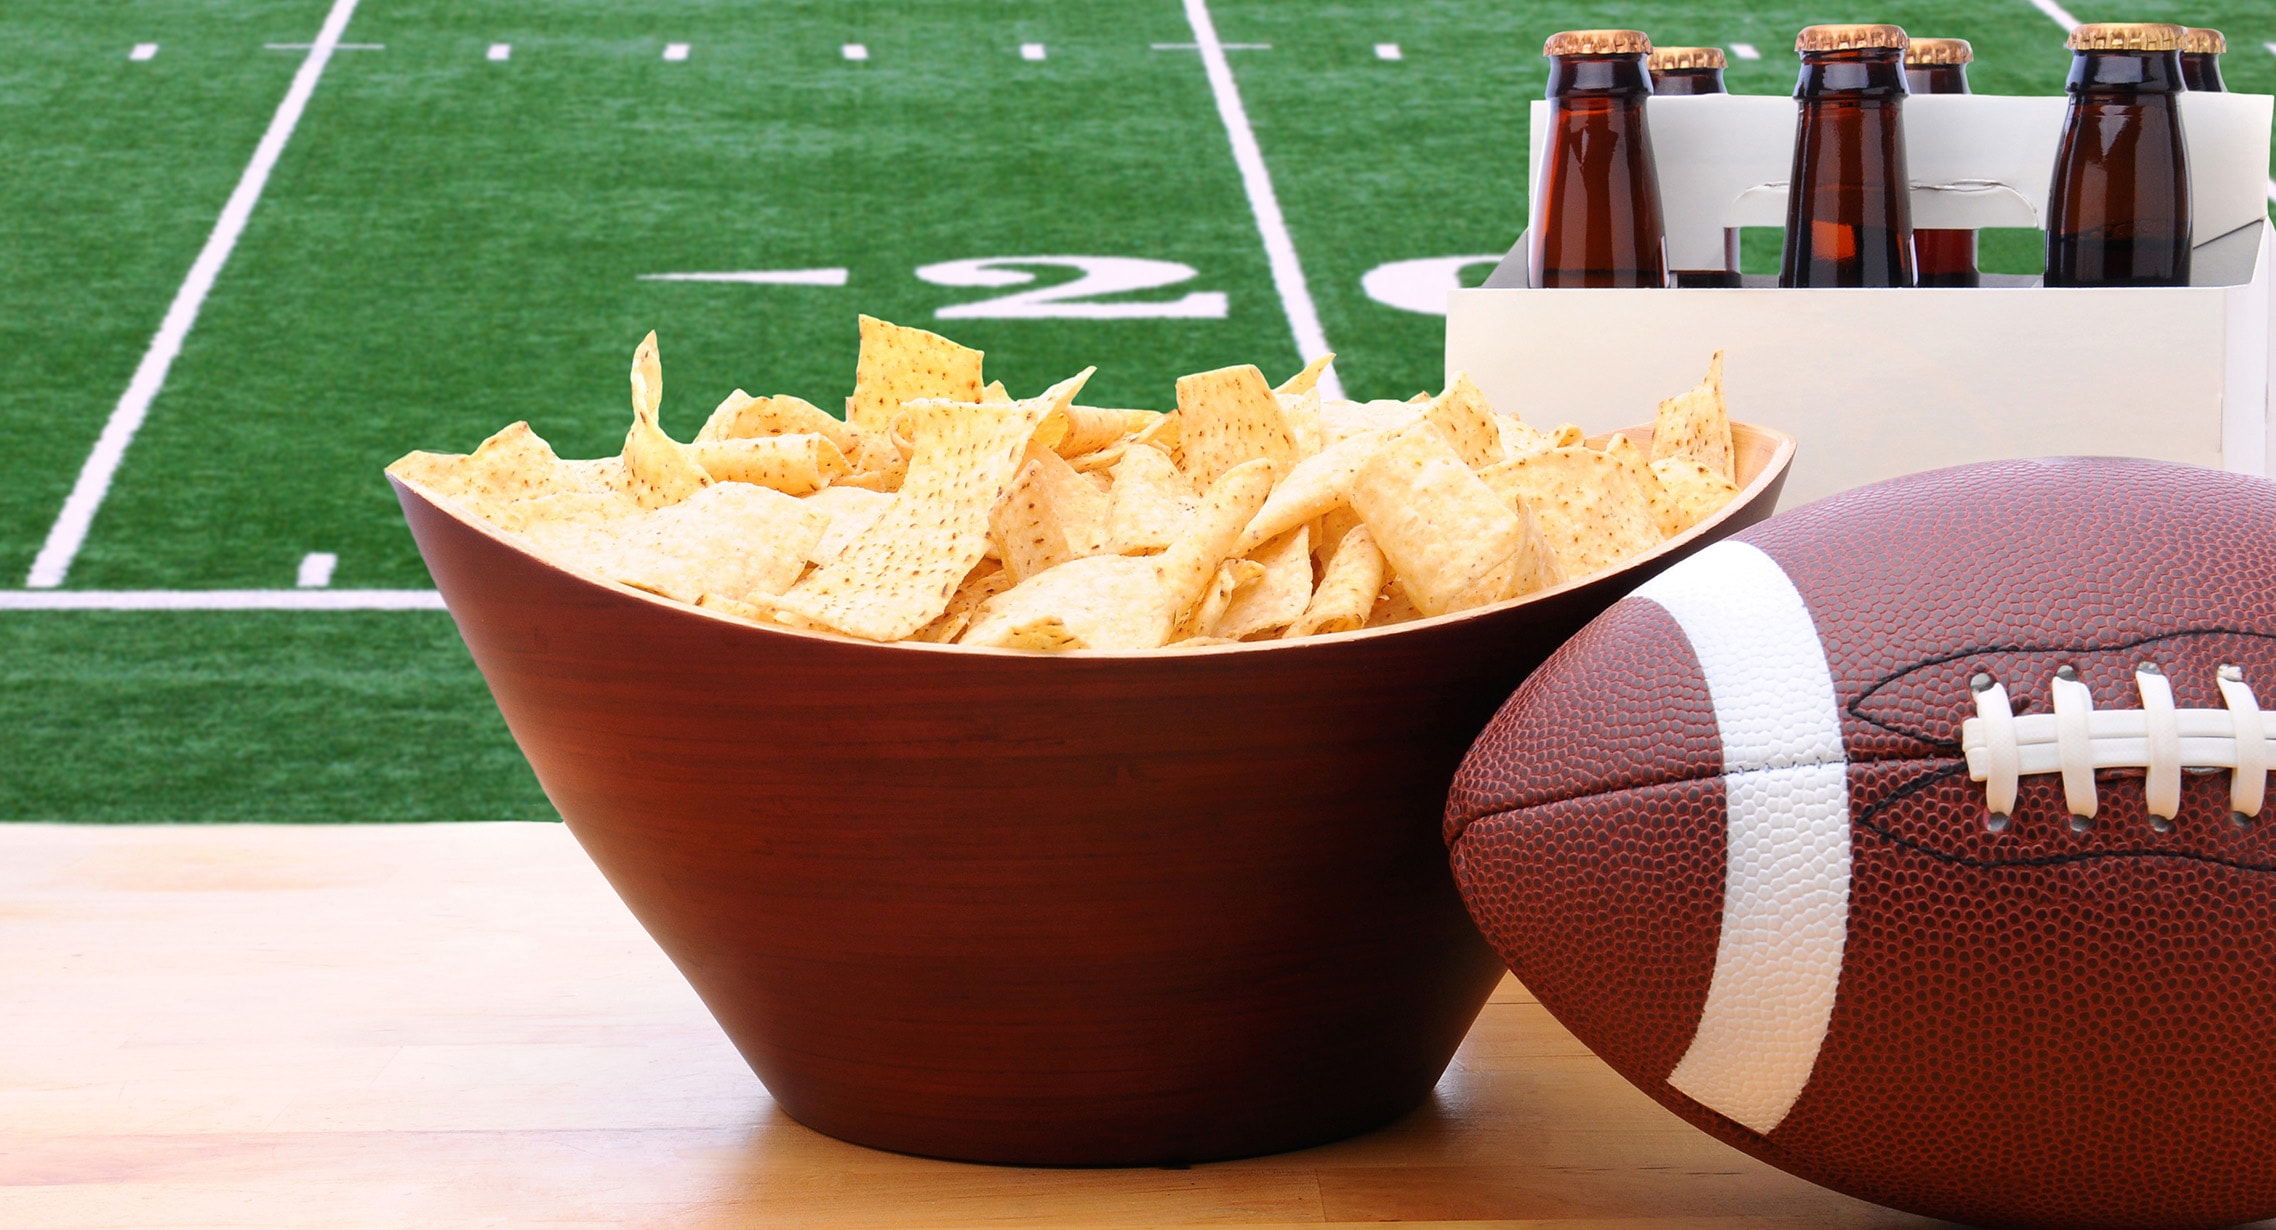 football, chips, and beer for super bowl Sunday!